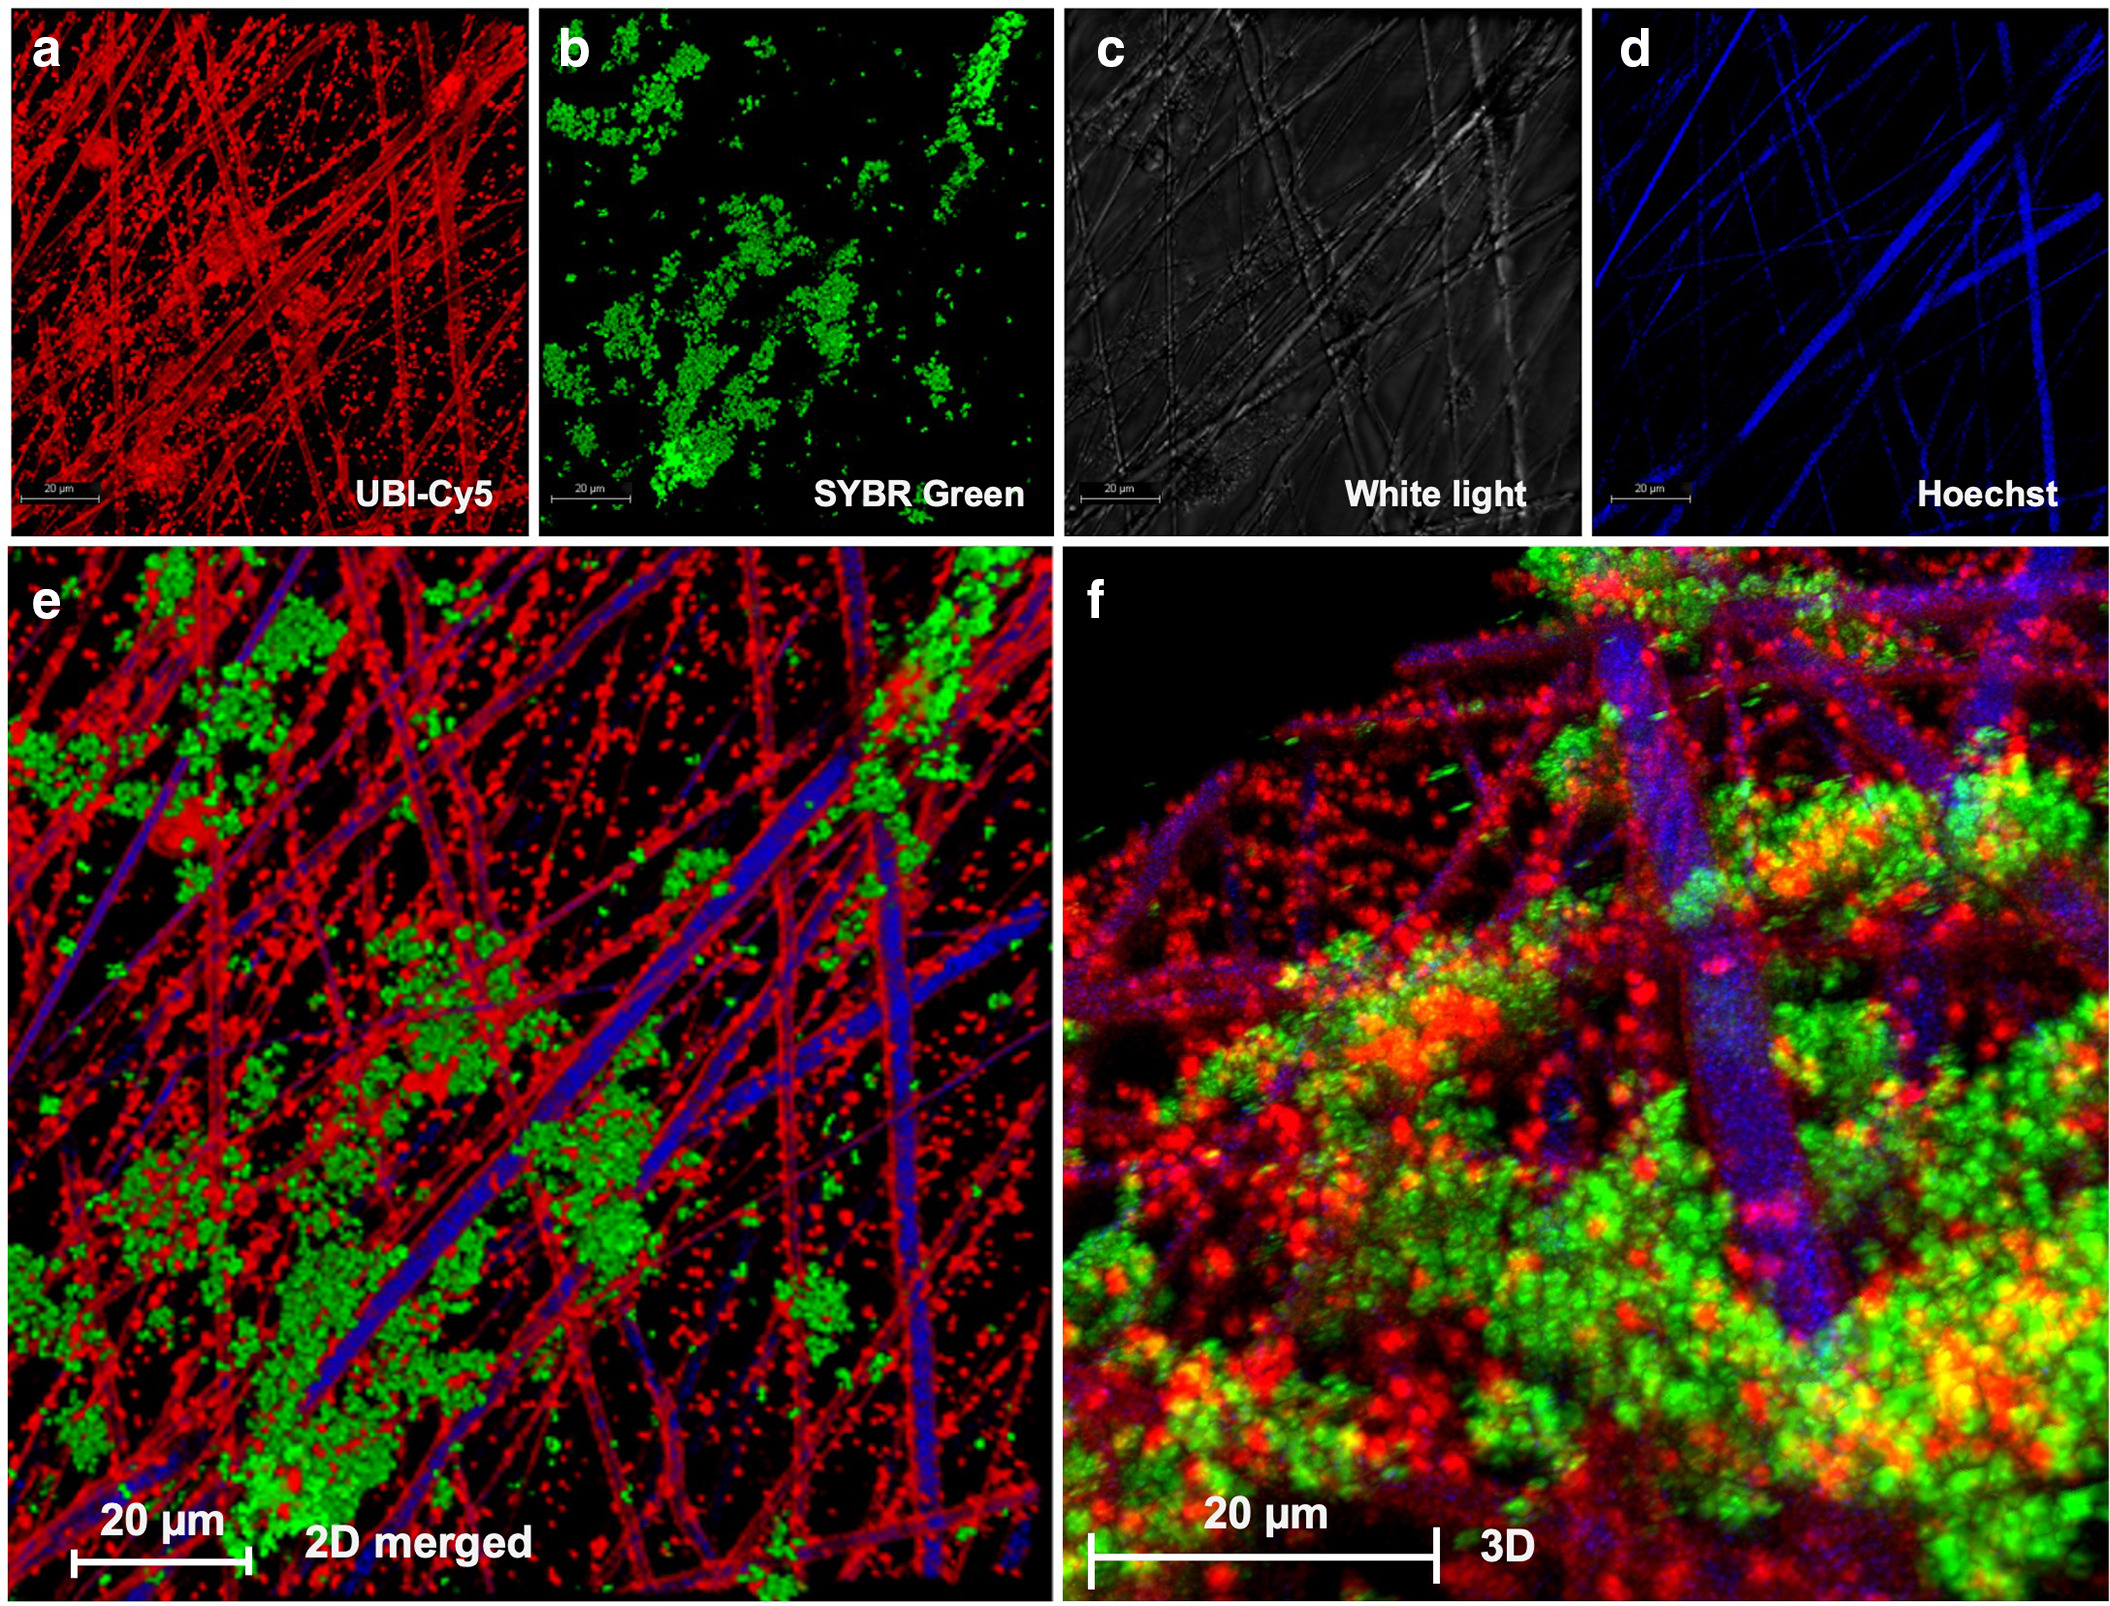 Fig. 2 
            Fluorescence confocal microscopy images of scaffolds containing bacteria in an associated biofilm matrix. a) Stapylococcus aureus is stained with UBI29-41-Cy5 (red) and b) biofilm-associated matrix is stained with SYBR Green. c) The 2D white light image of scaffold fibres and scaffold fibres stained with d) Hoechst (blue). A merged image is shown in e), and a 3D image is shown in f).
          